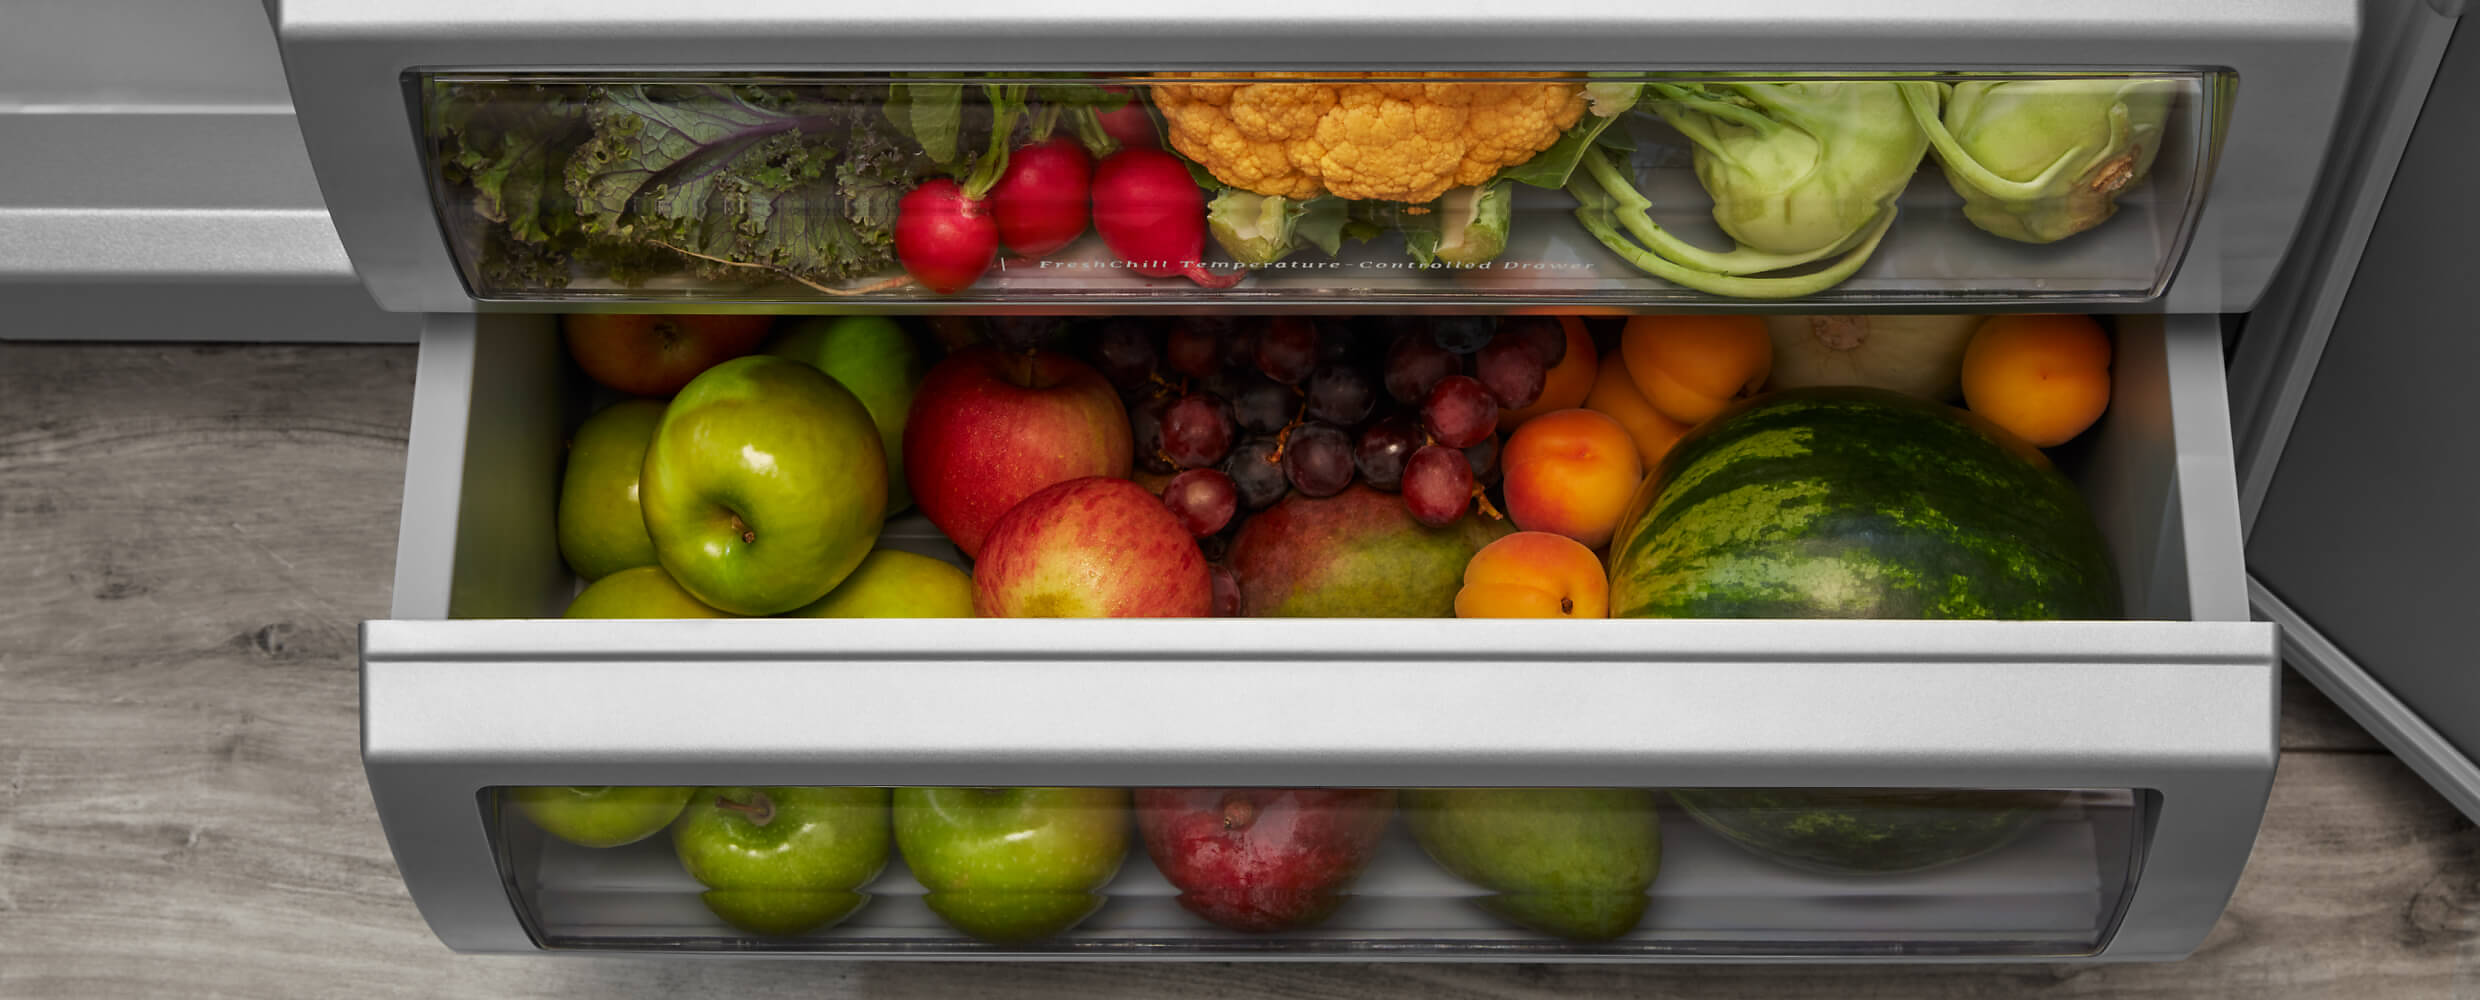 Produce in the FreshChill™ Temperature Controlled Drawer of the 42" KitchenAid® Built-In Side-by-Side Refrigerator